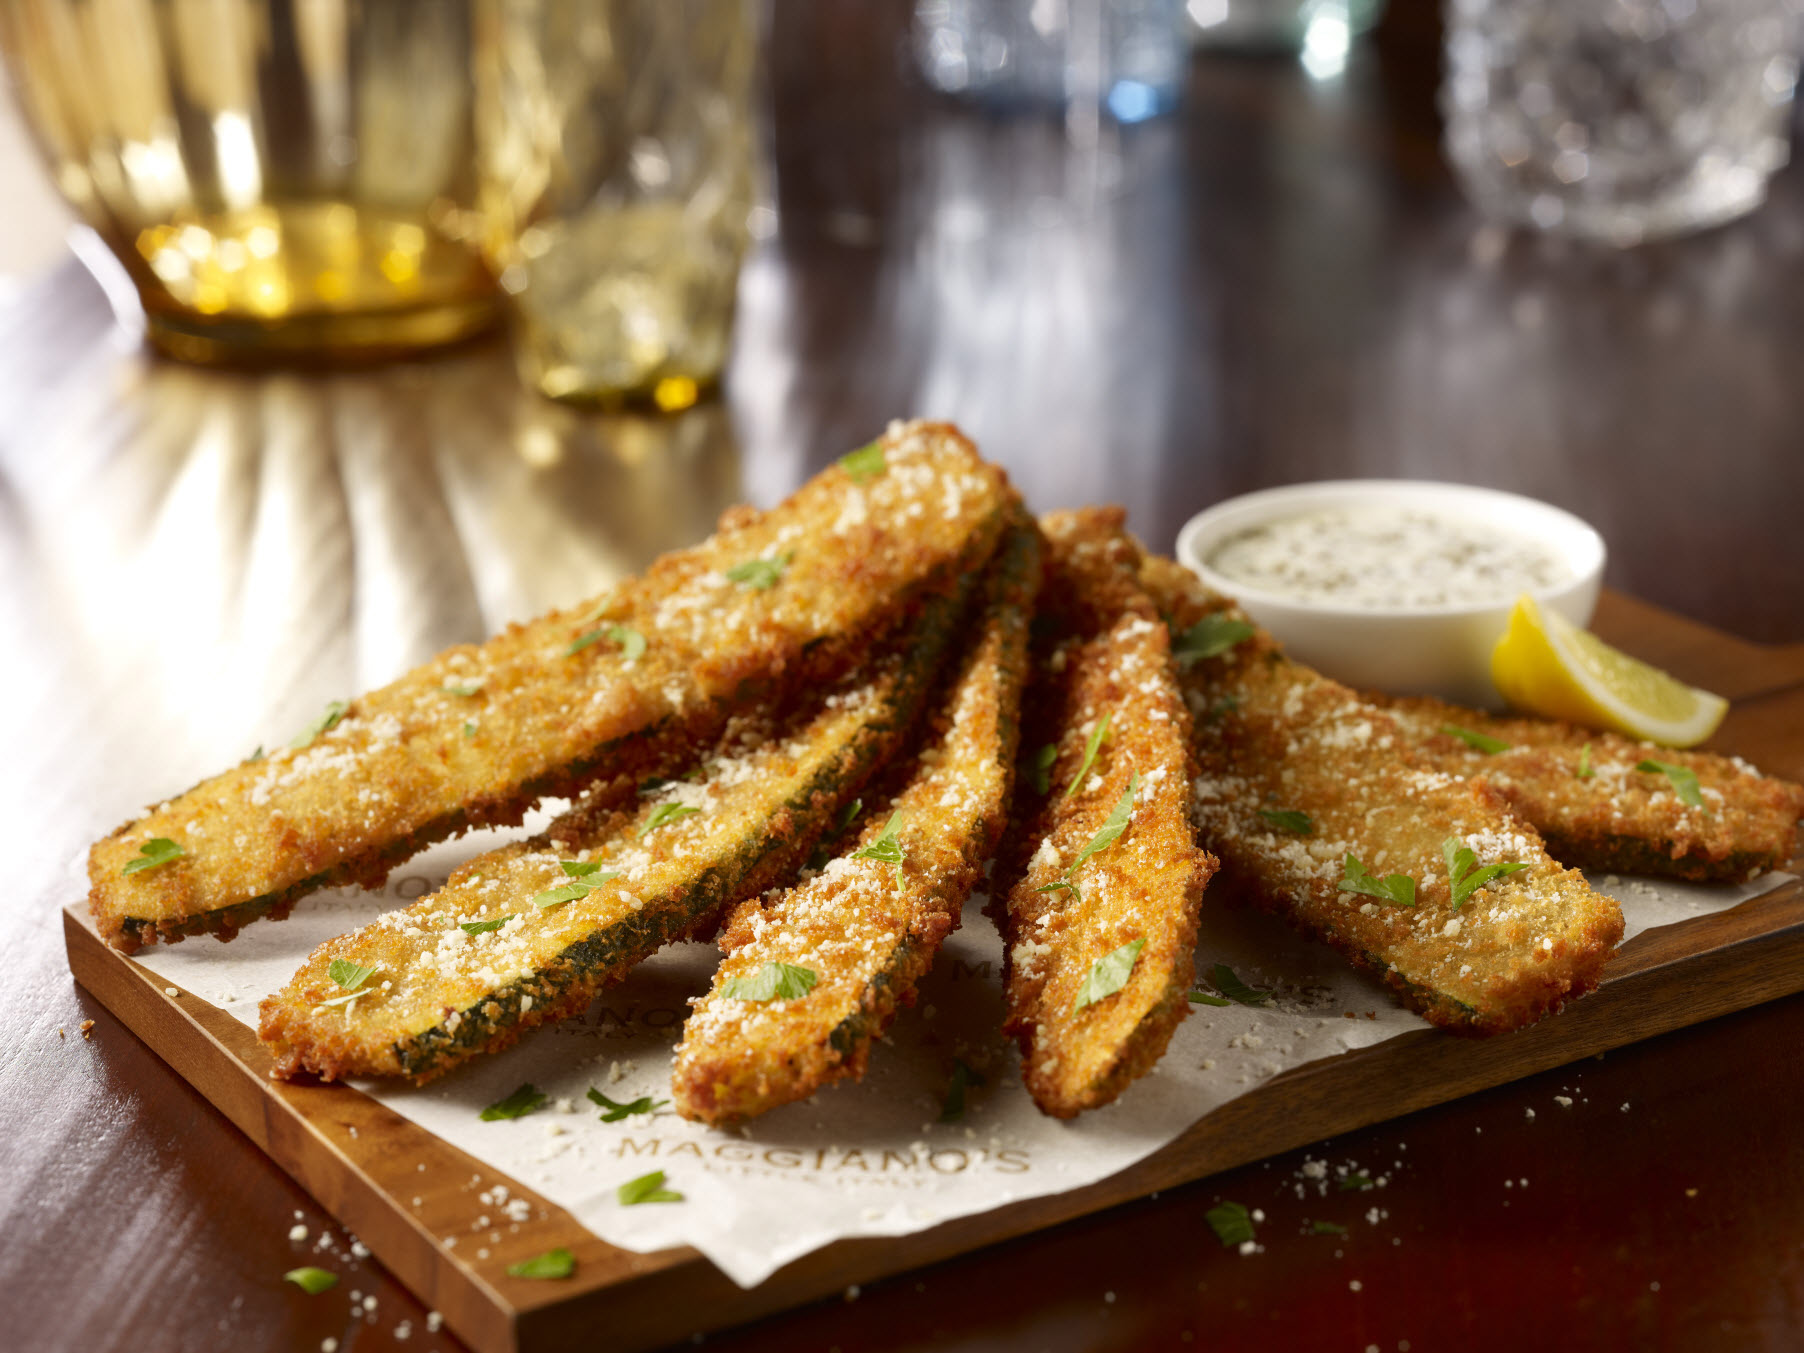 Crispy Zucchini Fritte. Double the portion on any carryout order for appetizers without doubling the price!